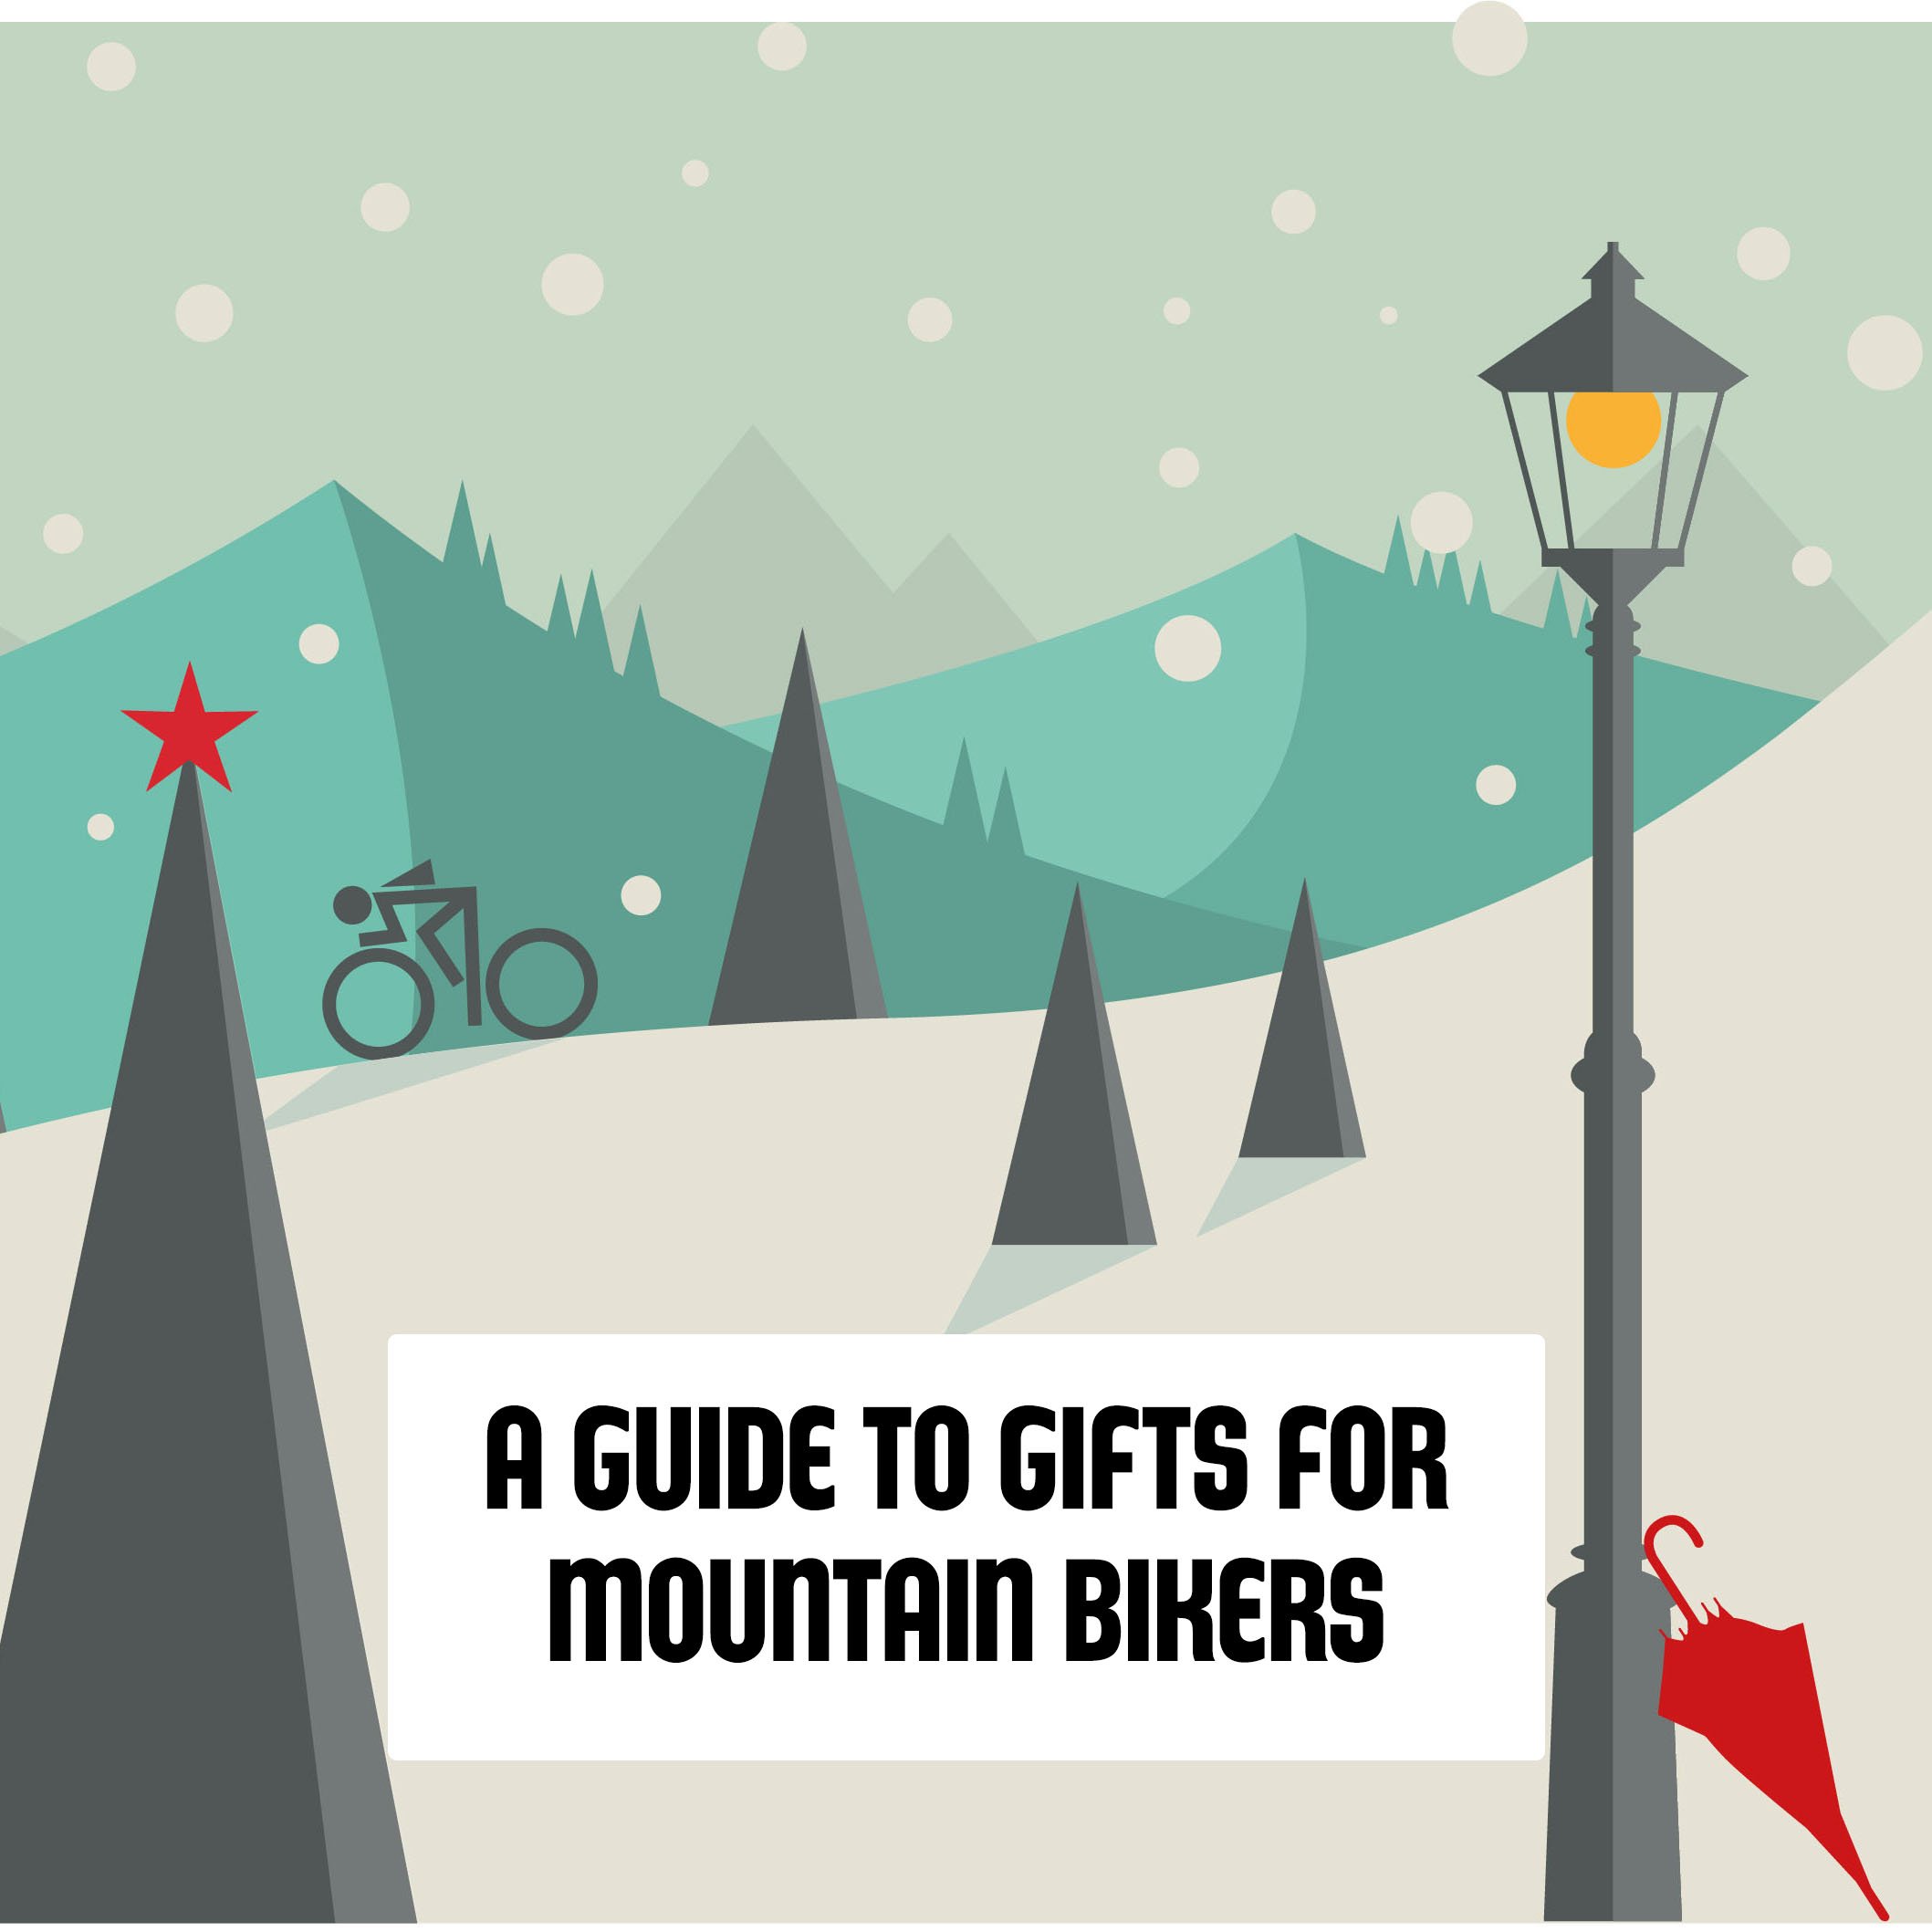 Gifts for MTBers